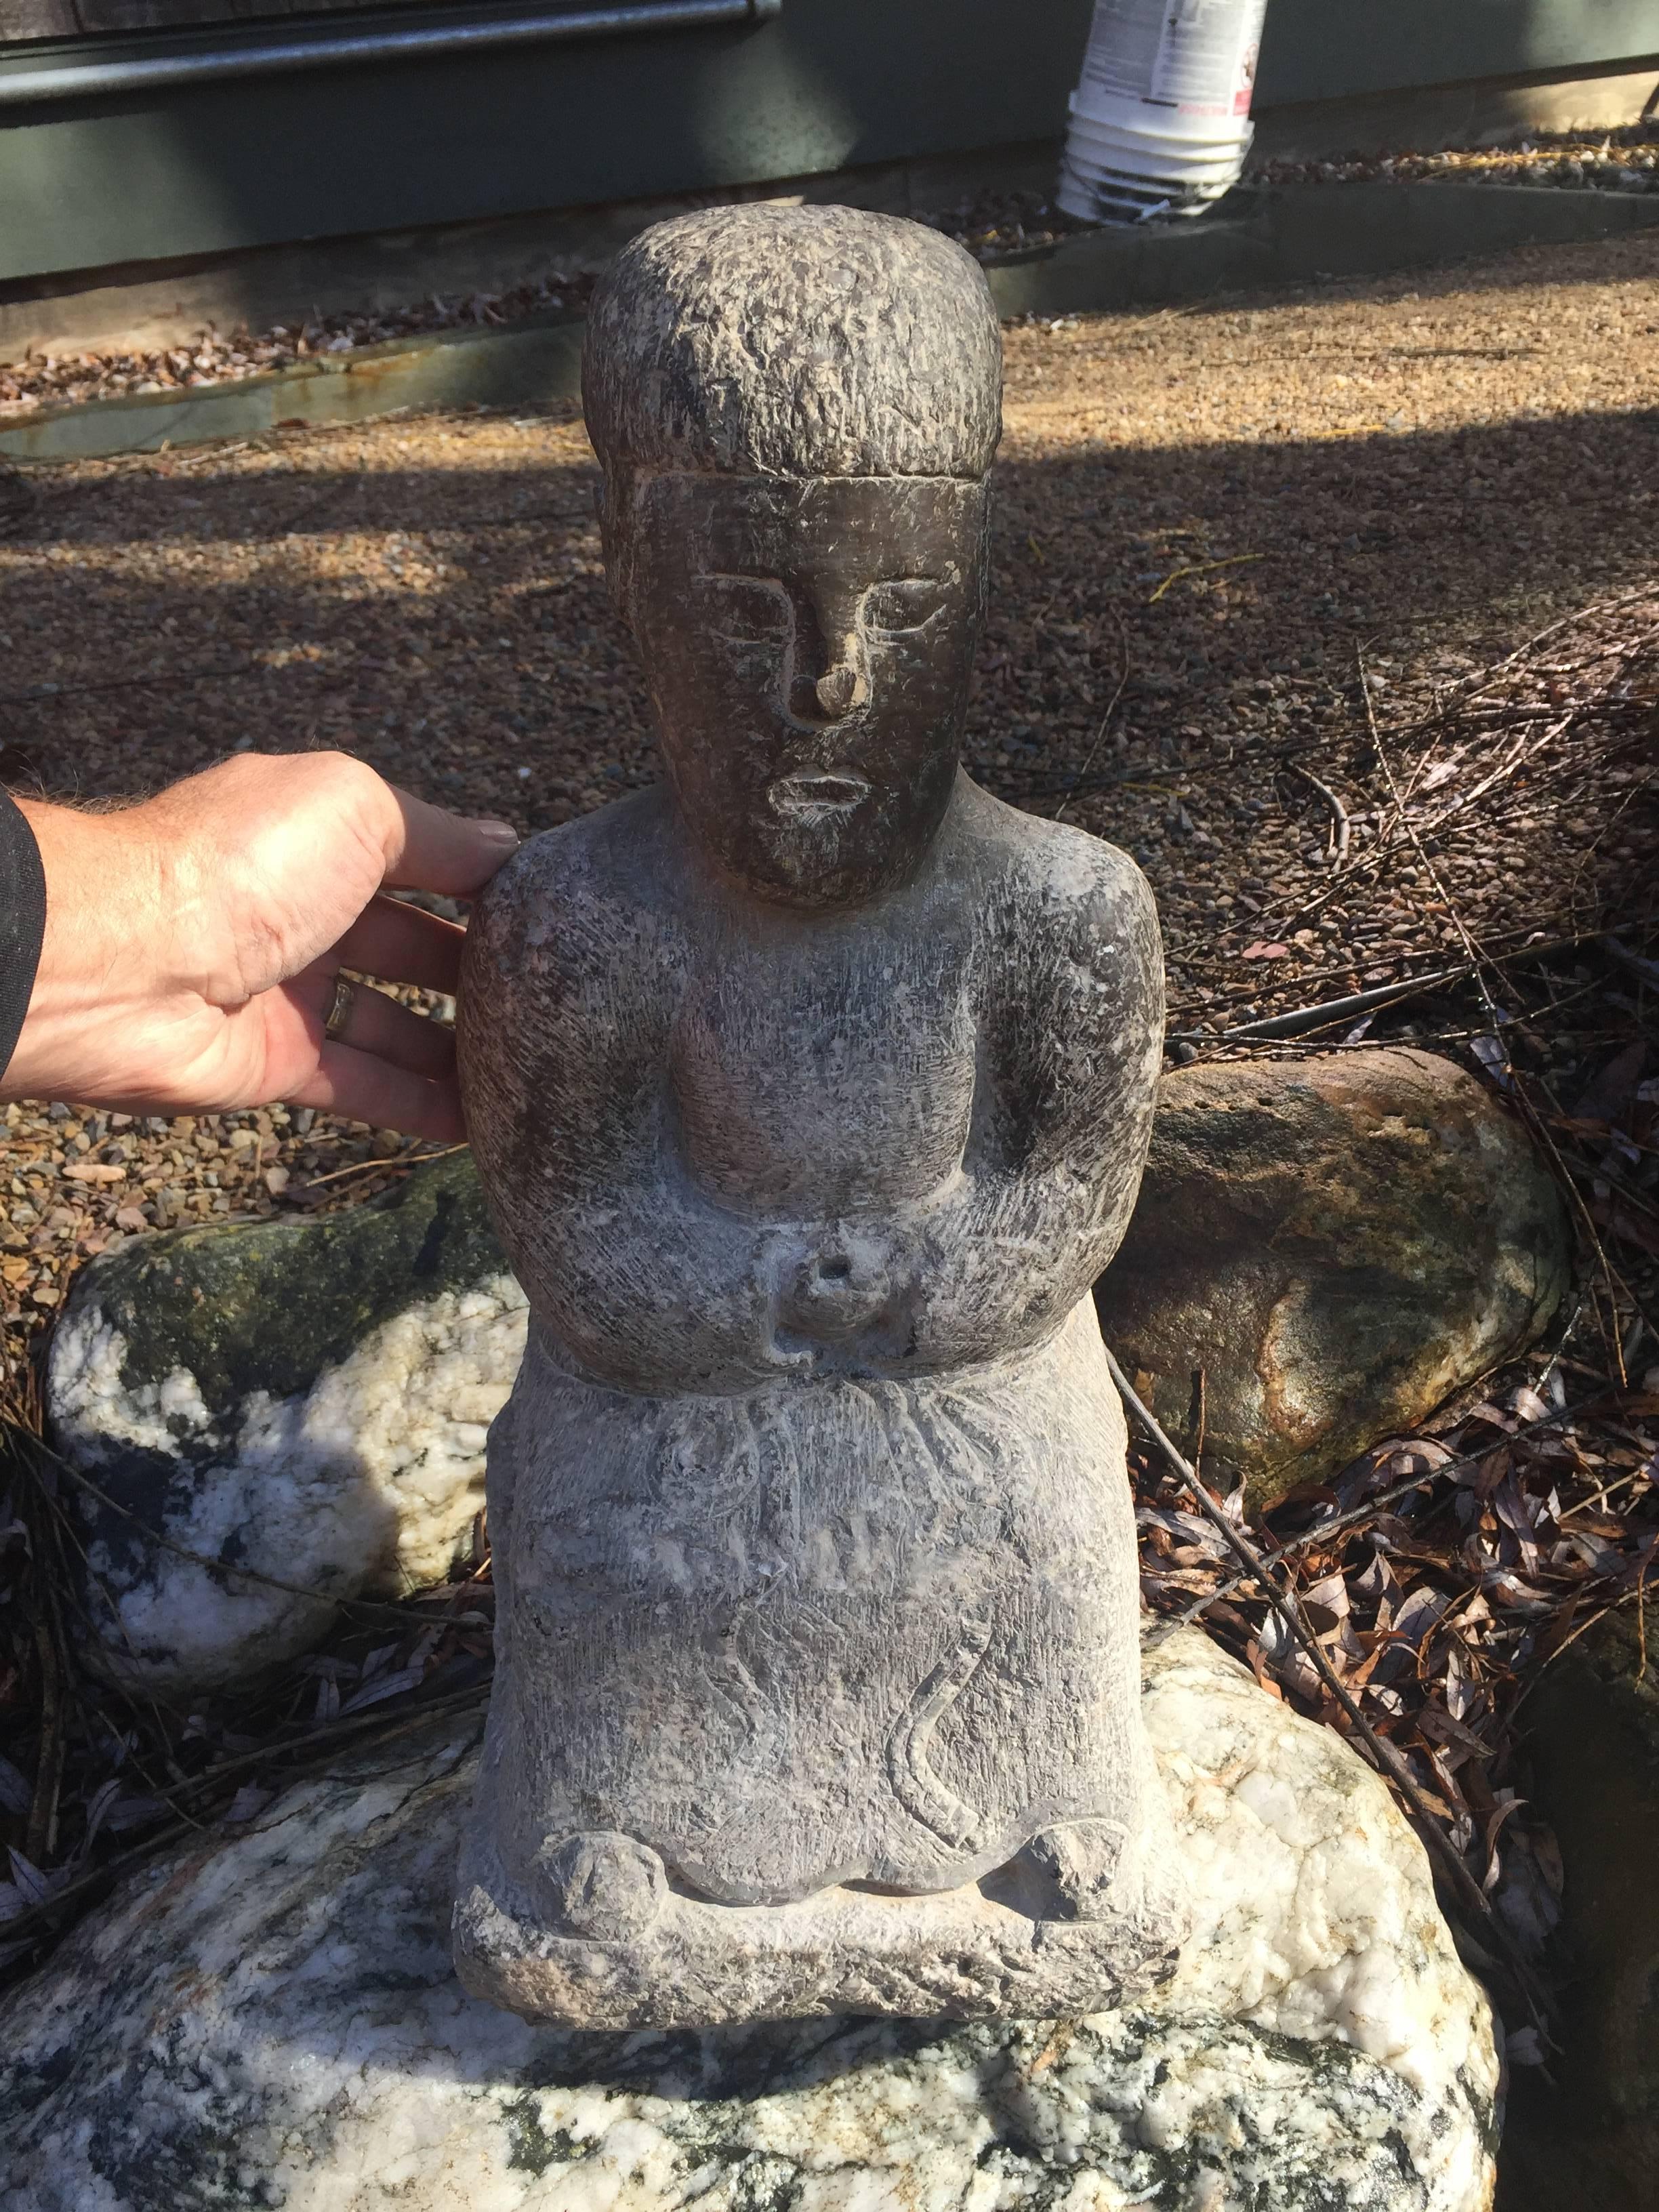 This is a rare and very unusual 20 inch tall spirit mother figure hand-carved from solid limestone. It dates to several hundreds of years ago to the Qing dynasty or earlier (1644-19111). We acquired it for our private collection during one of many